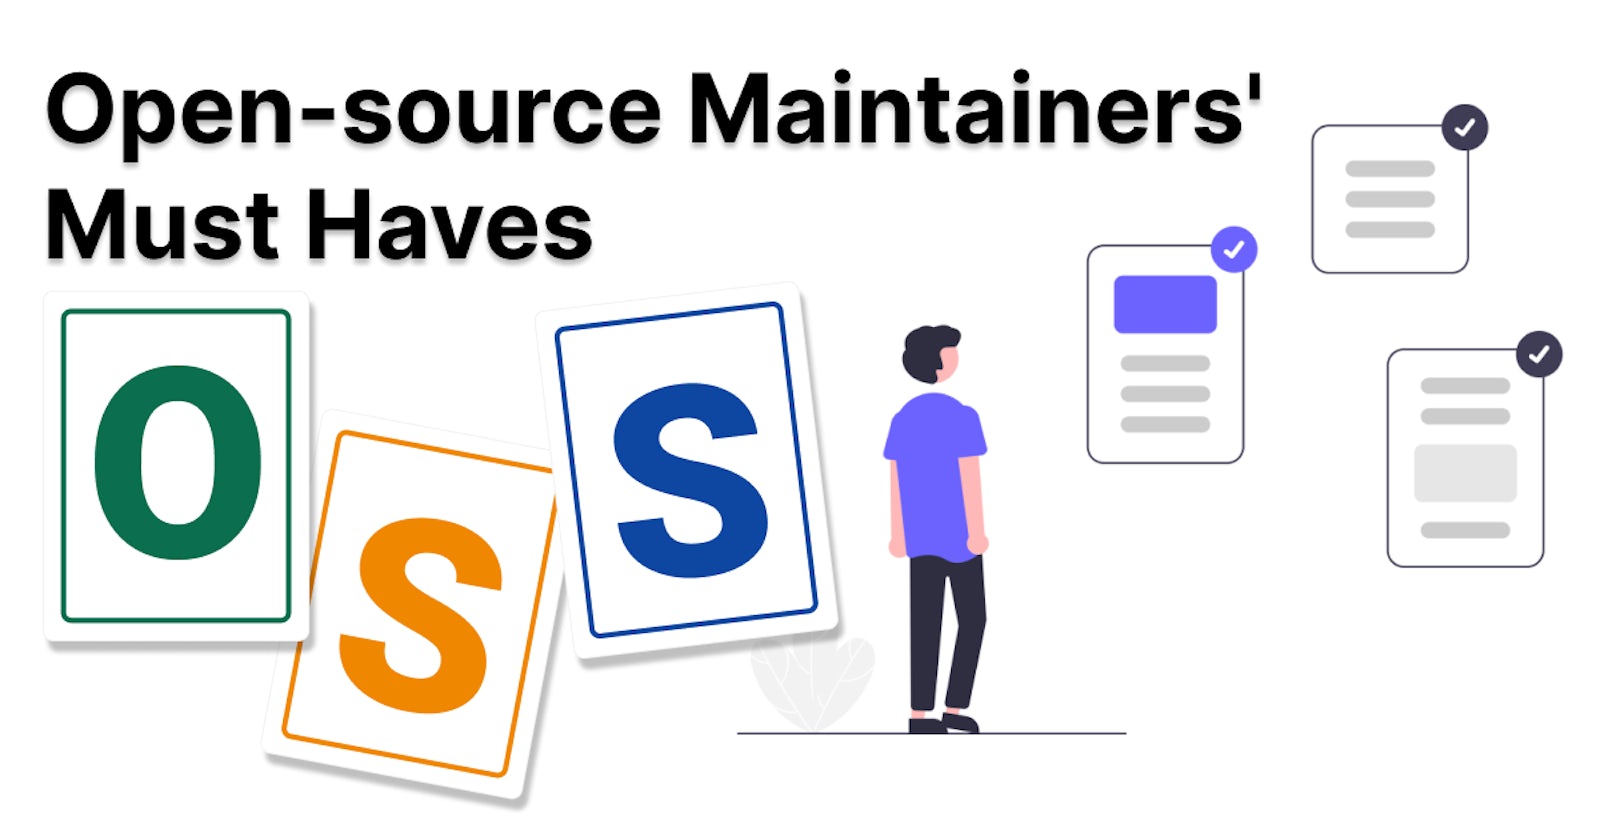 Open-source Maintainers' Must Haves